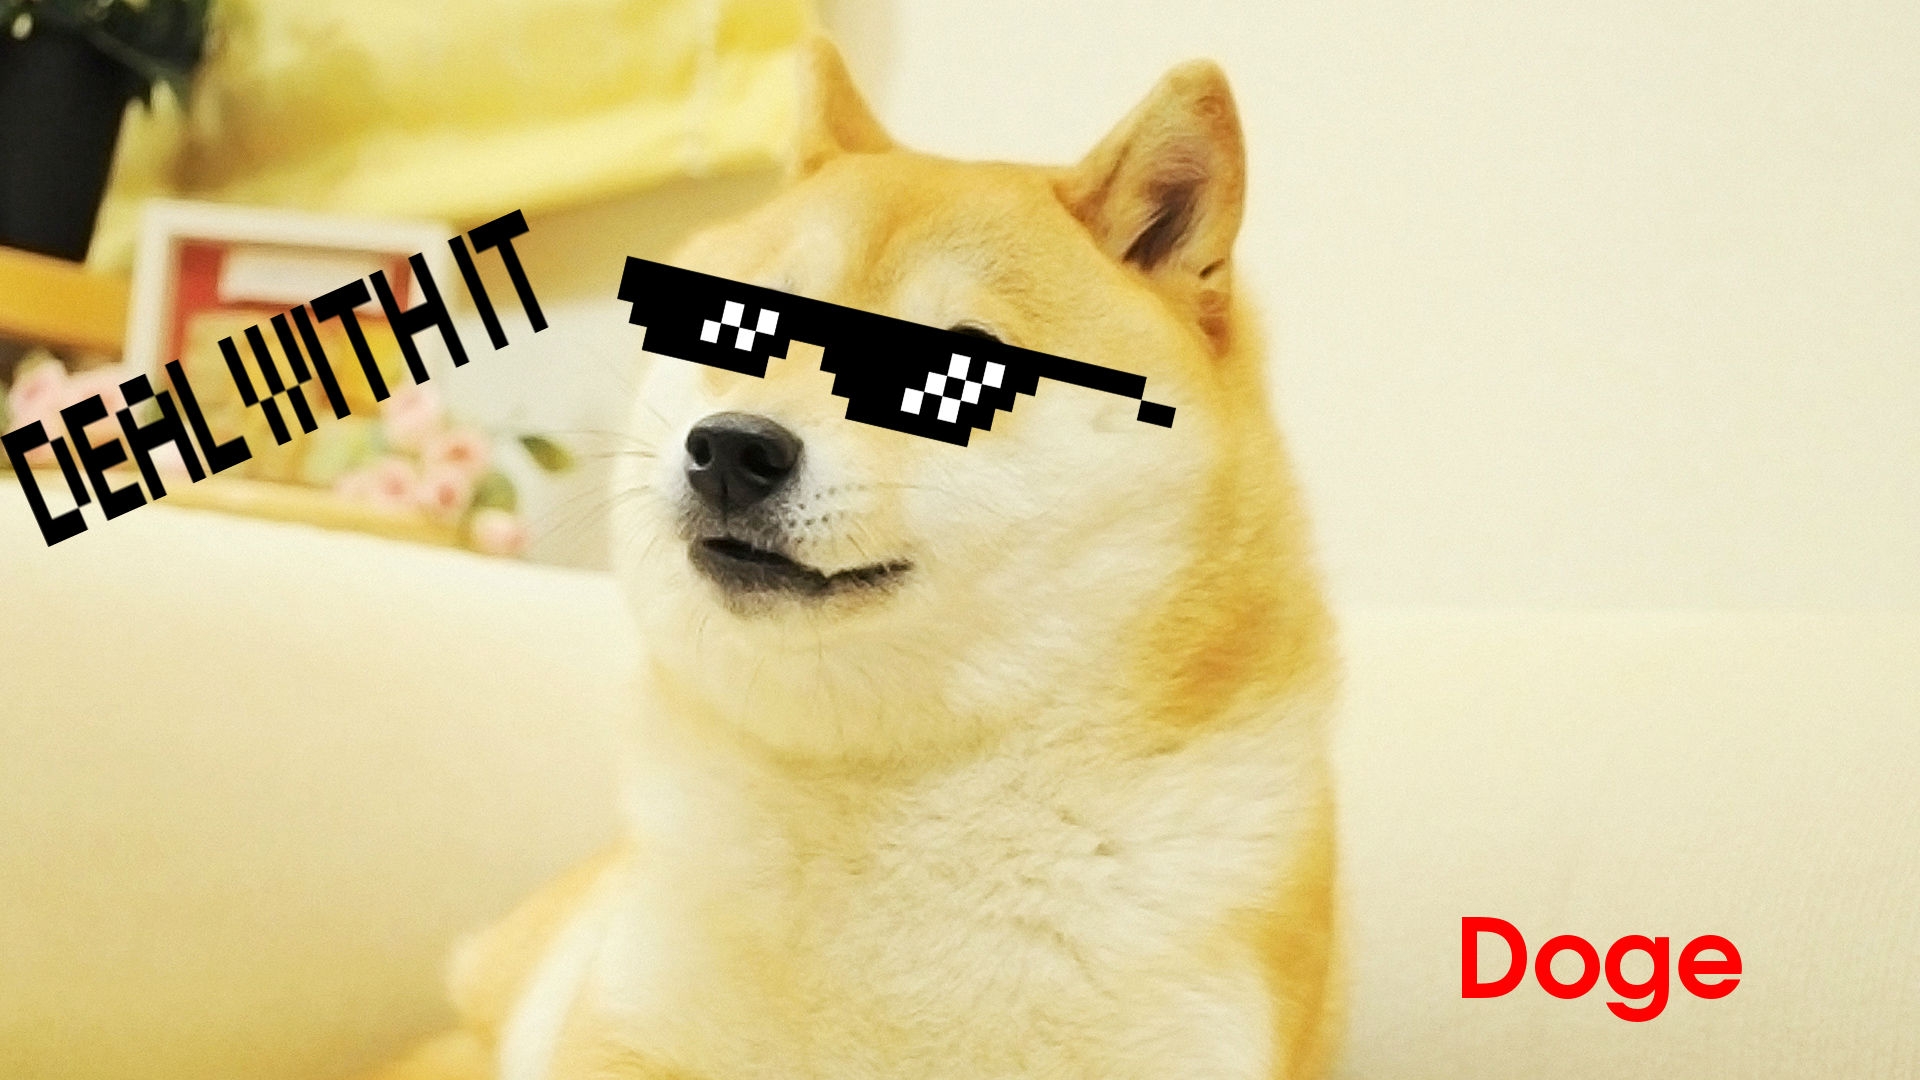 Such swag   Doge Wallpaper 1920x1080 159722